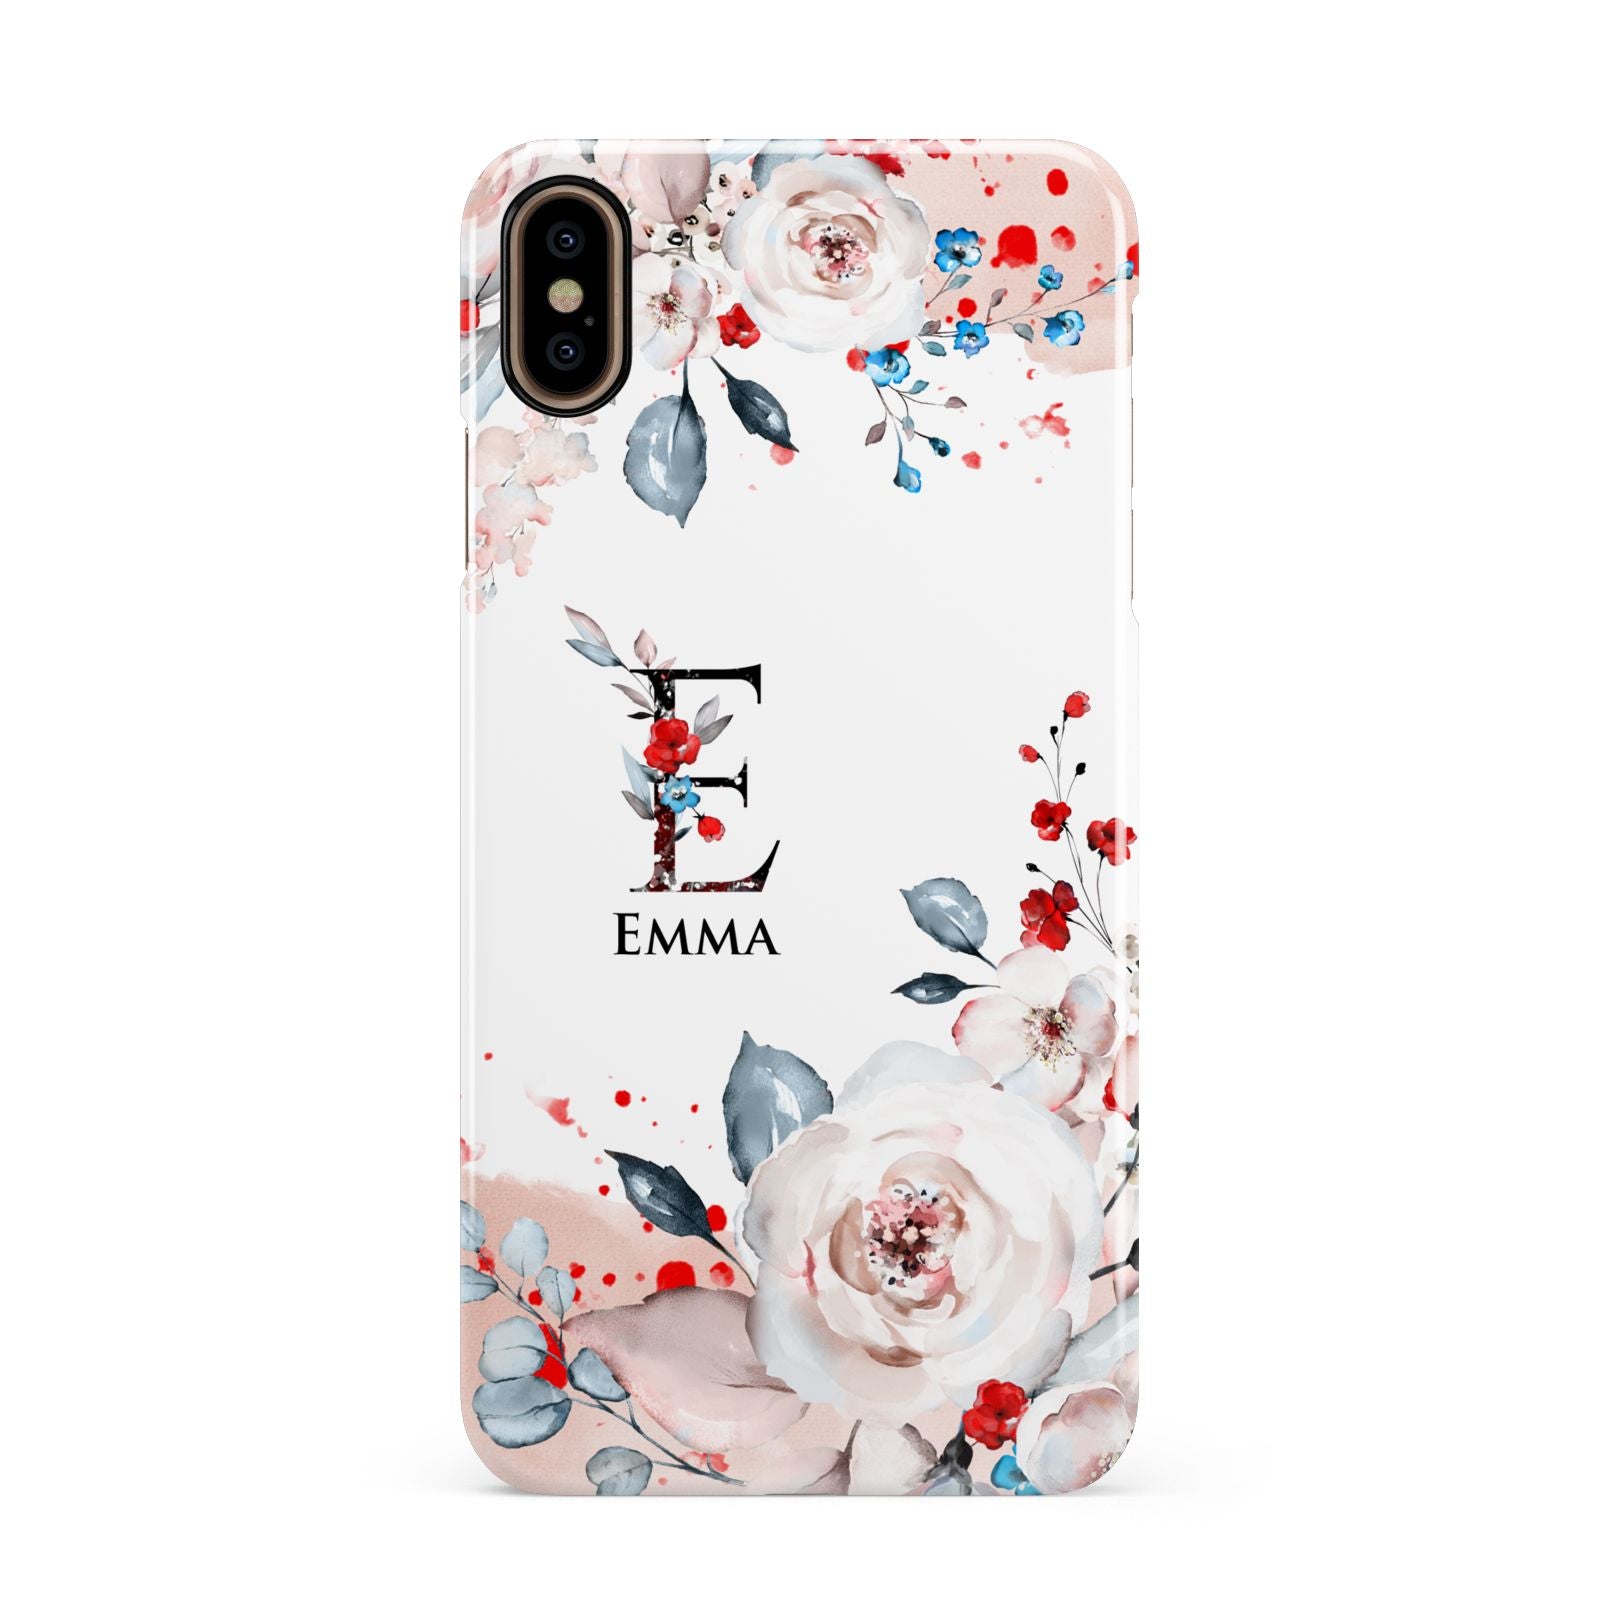 Monogrammed Roses Floral Wreath Apple iPhone Xs Max 3D Snap Case